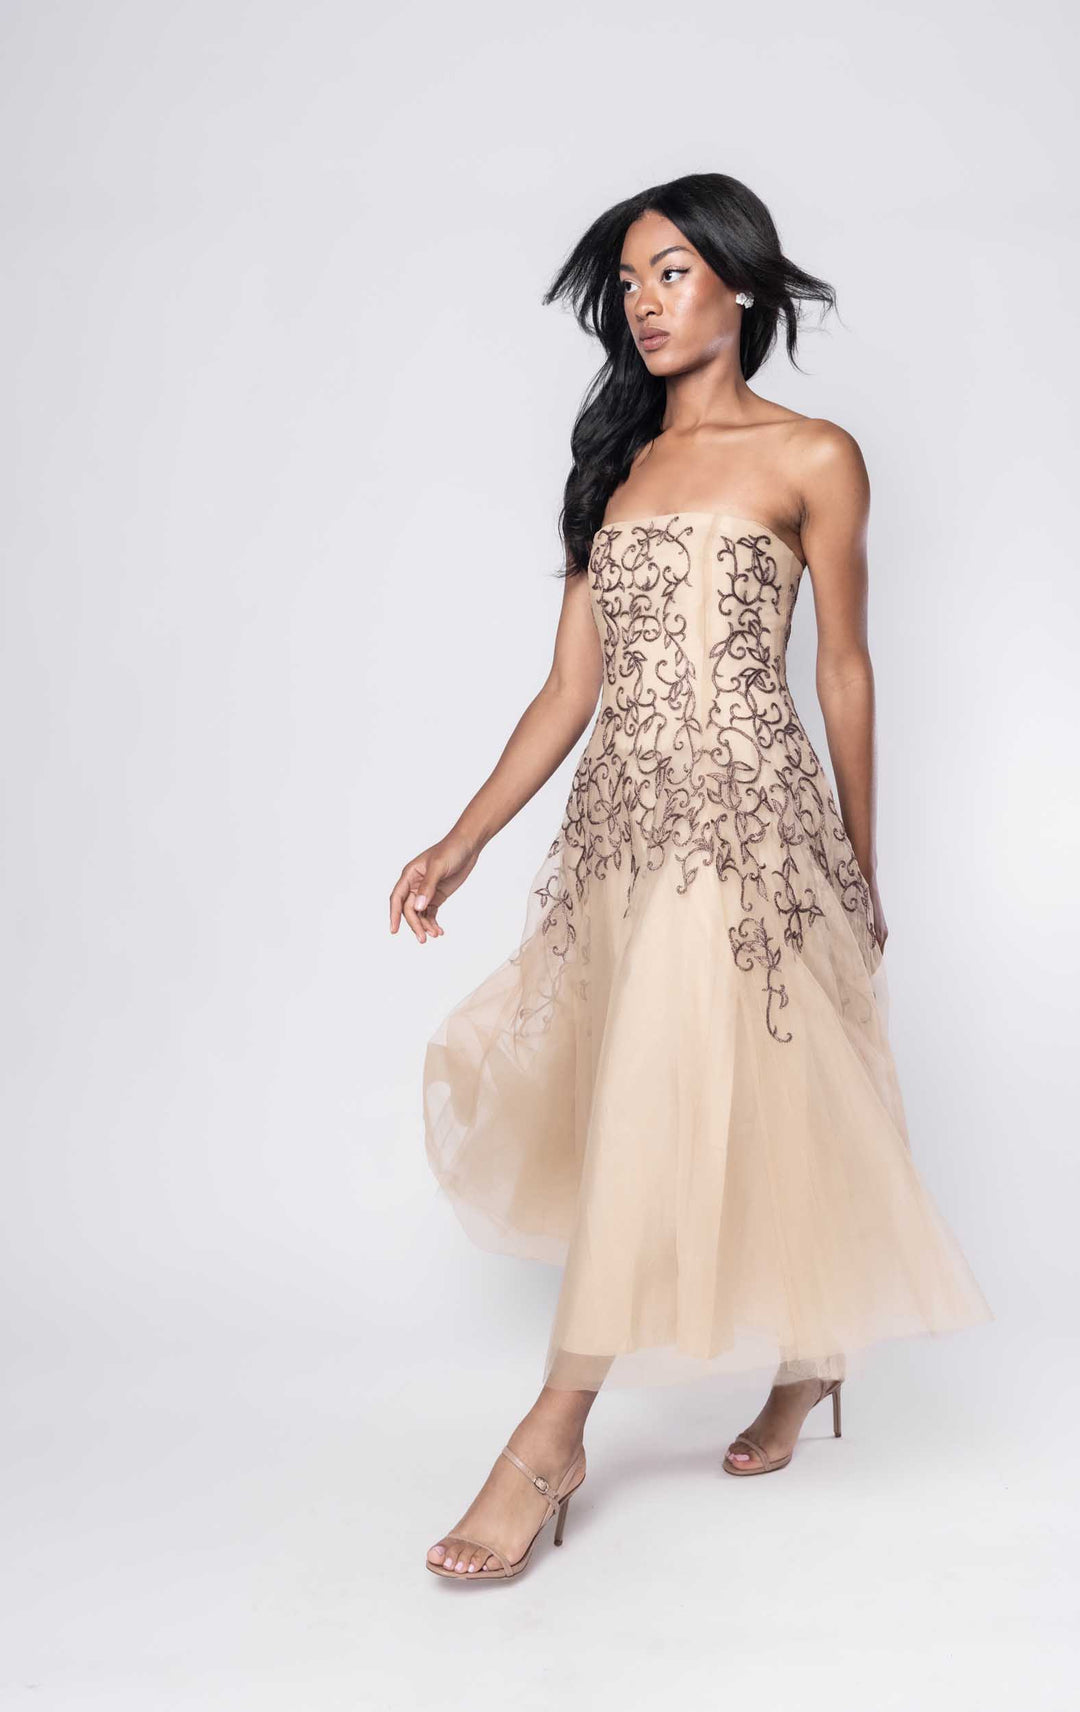 Beautiful model in nude Sujata Gazder dress with ornate stitching - side view